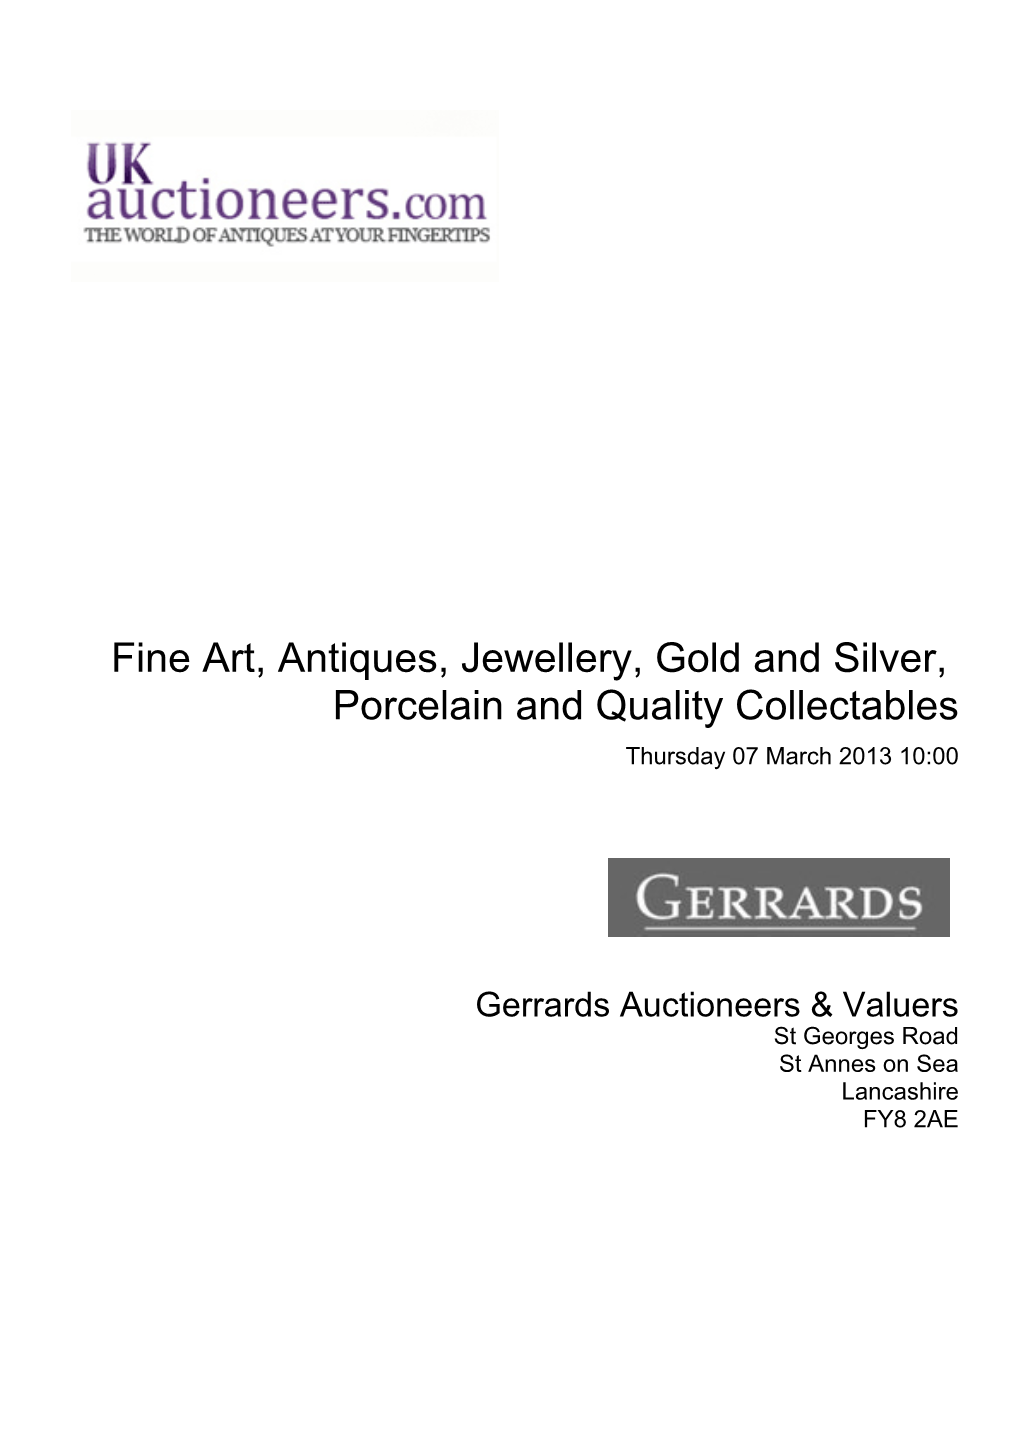 Fine Art, Antiques, Jewellery, Gold and Silver, Porcelain and Quality Collectables Thursday 07 March 2013 10:00